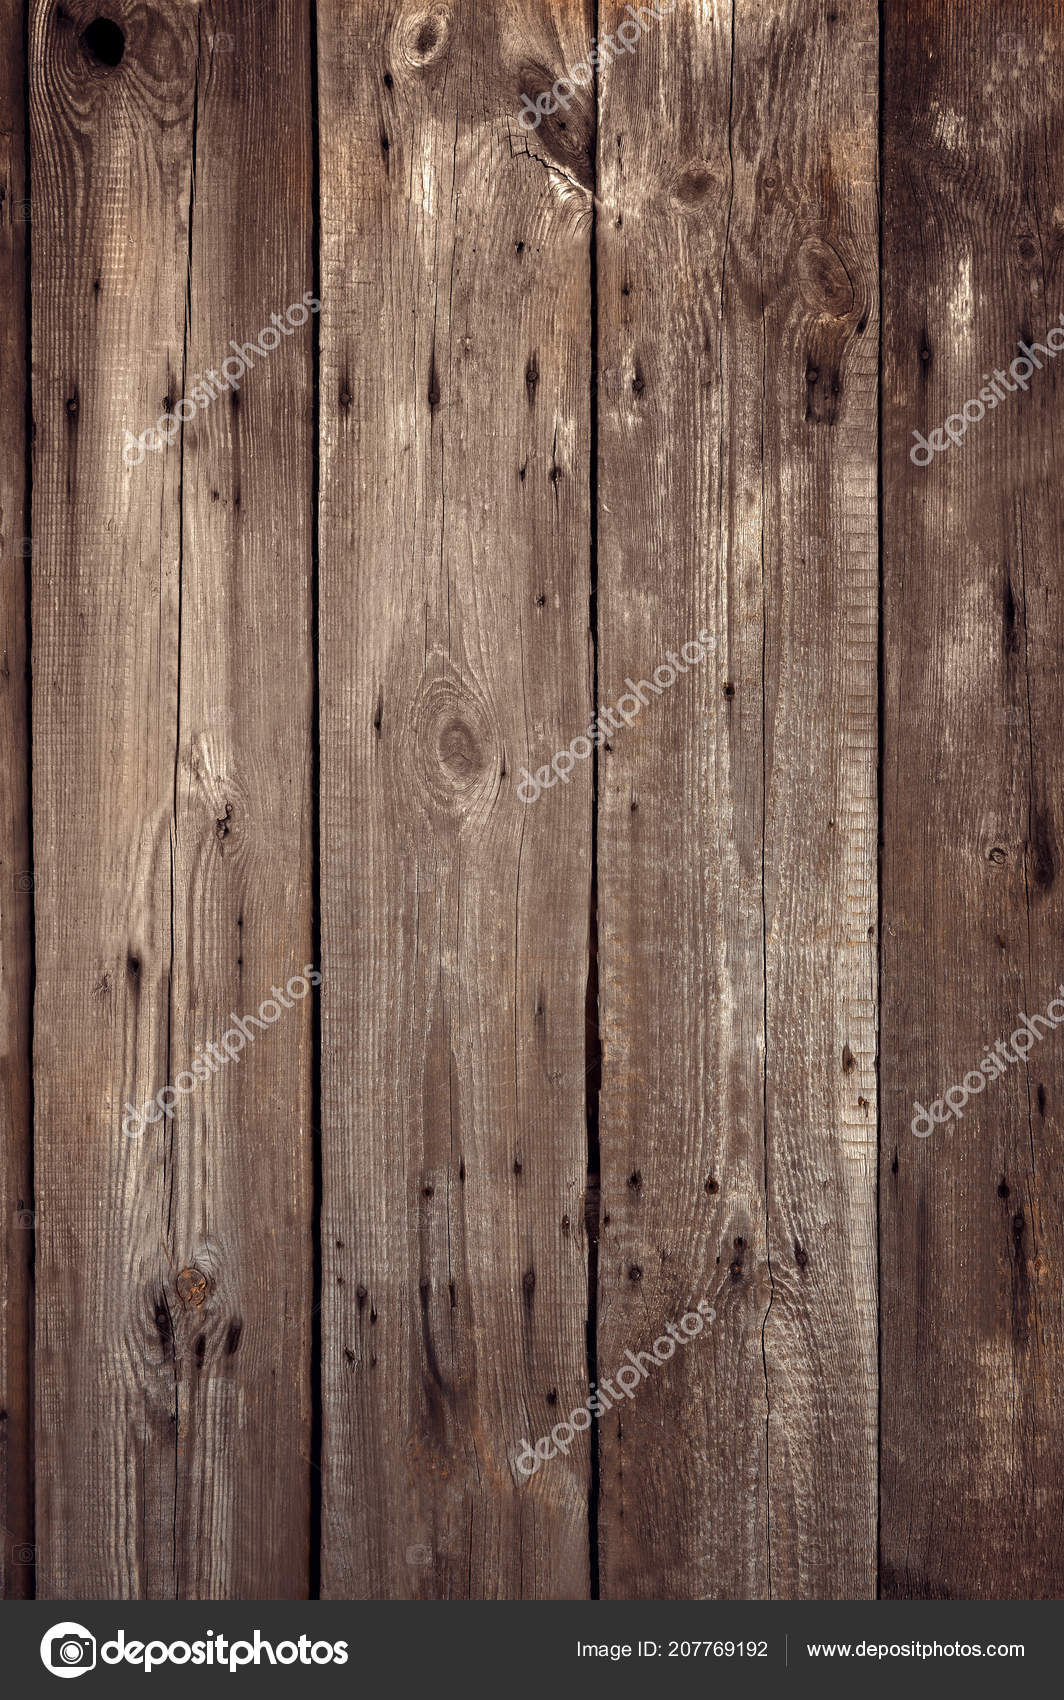 wooden table top from old boards. grunge wood texture from vintage